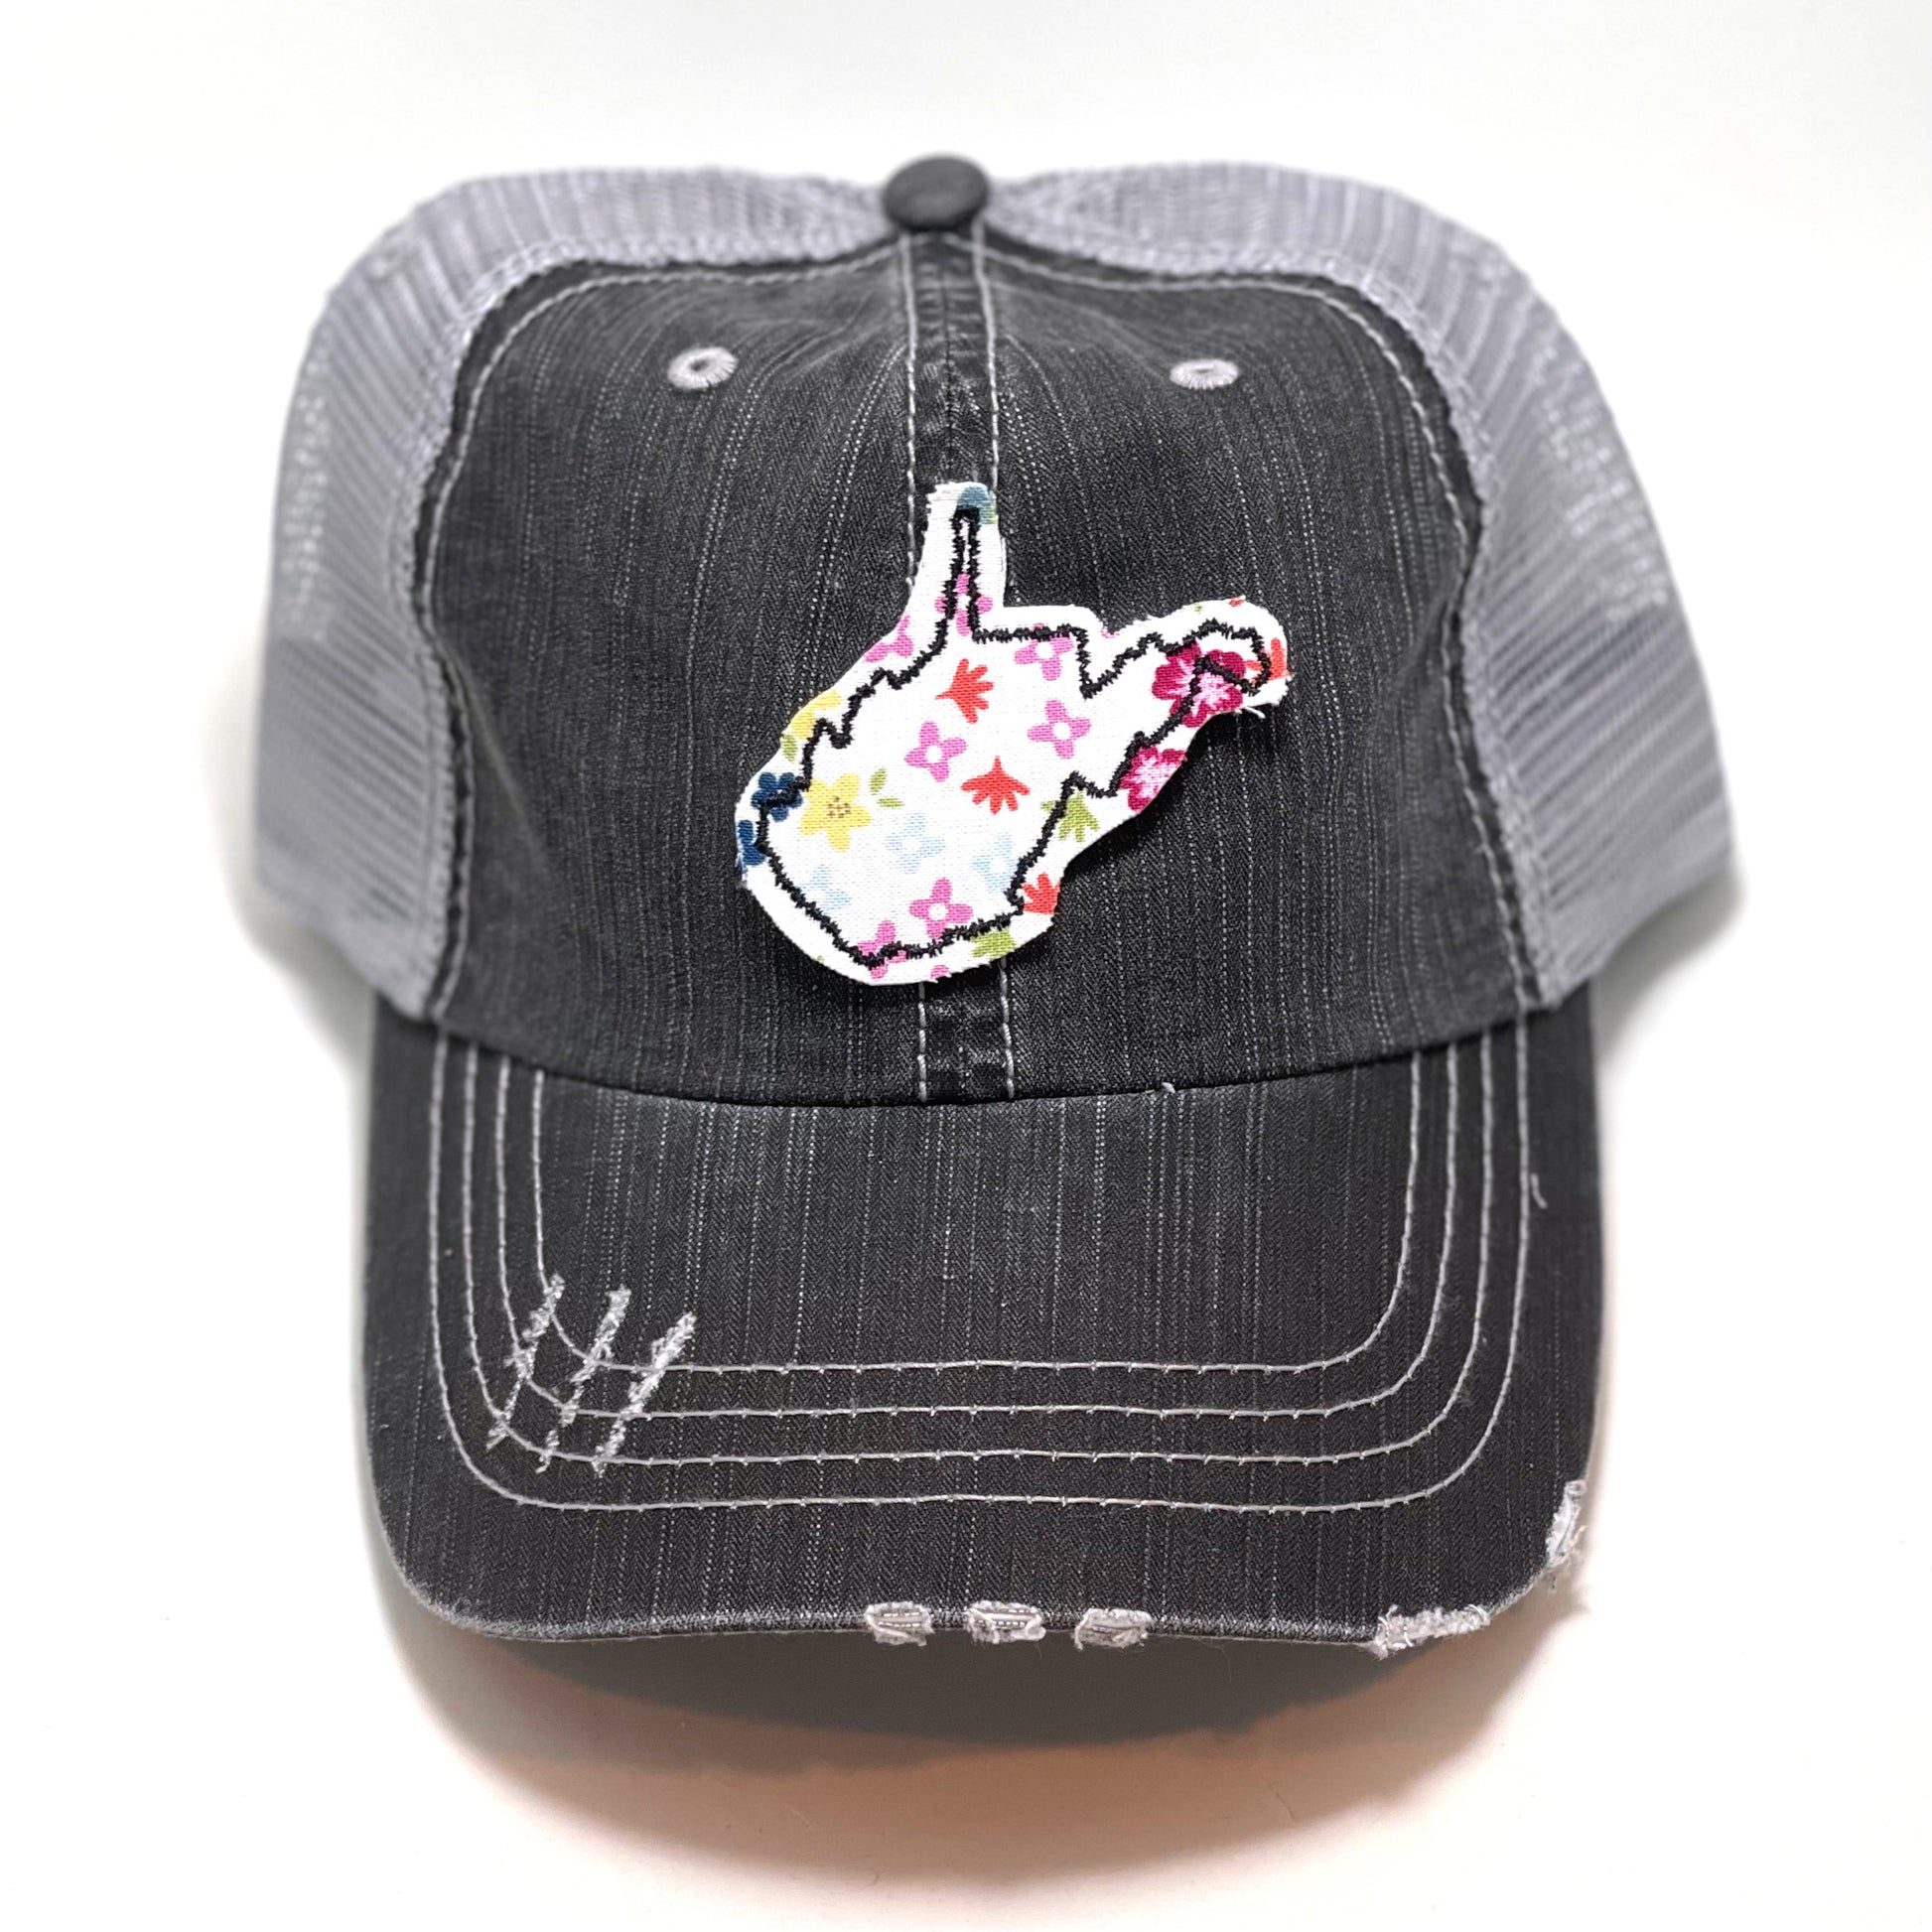 gray distressed trucker hat with gray floral fabric state of West Virginia